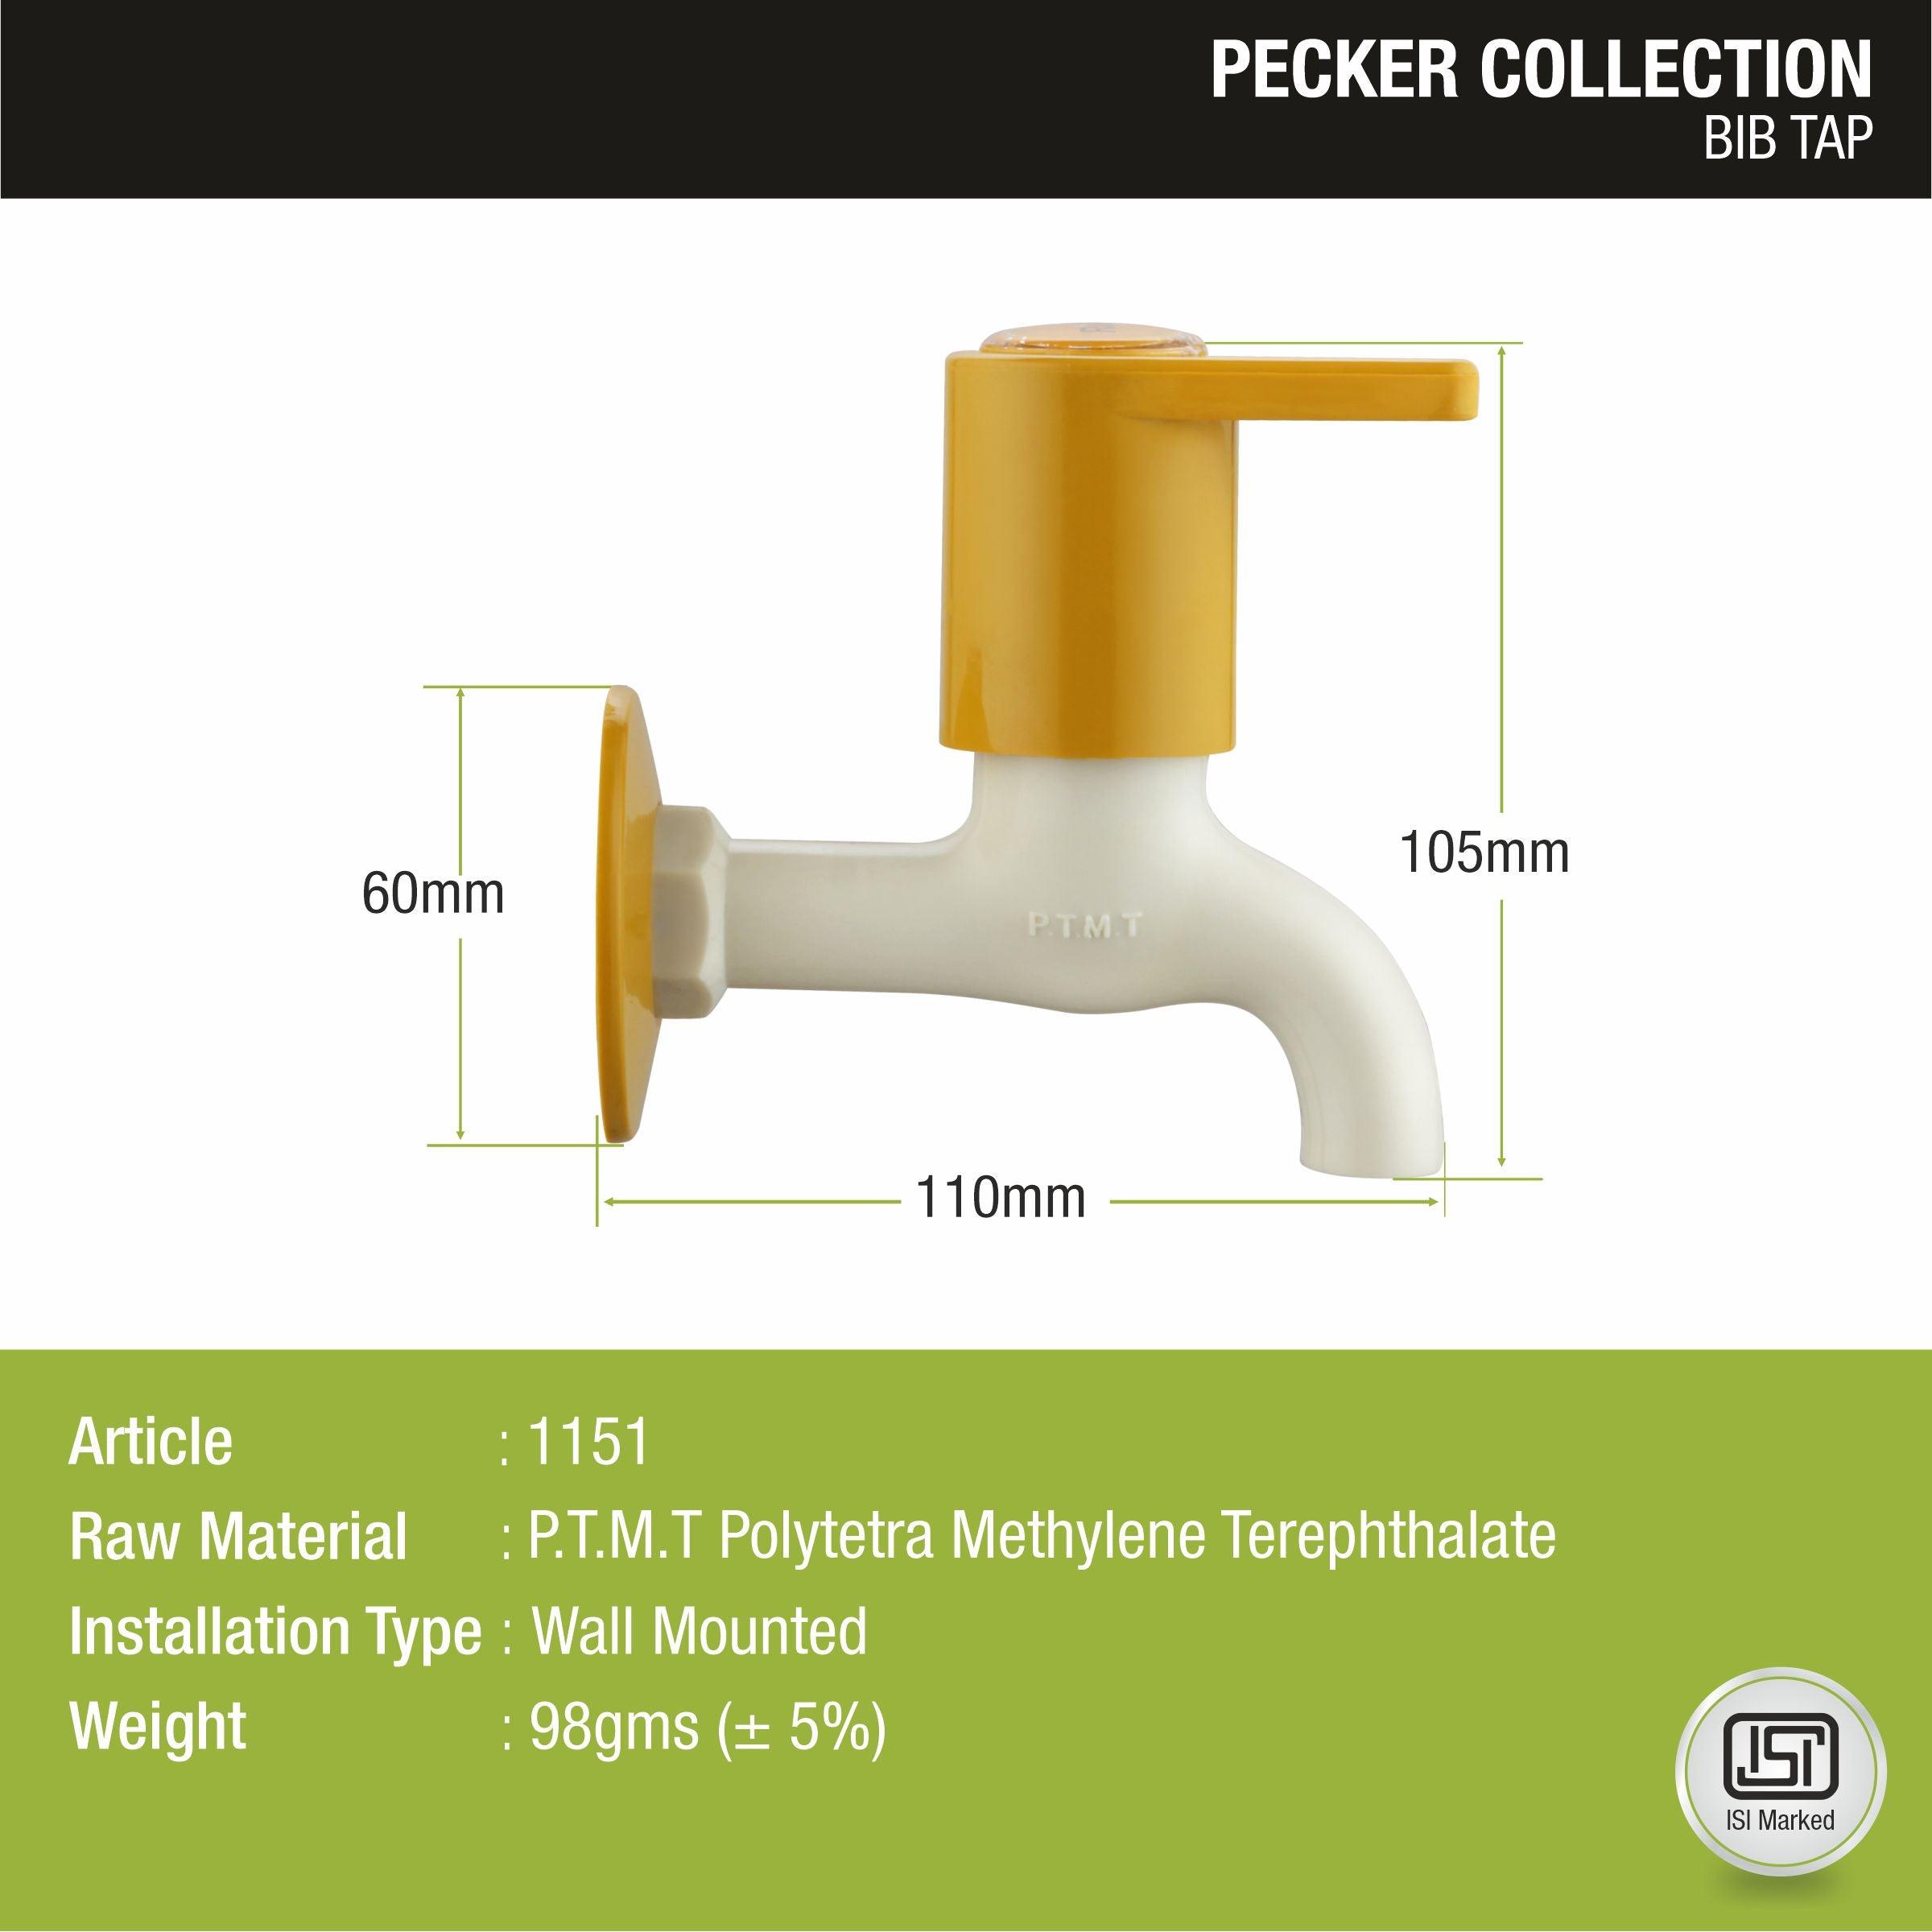 Pecker Bib Tap PTMT Faucet sizes and dimensions